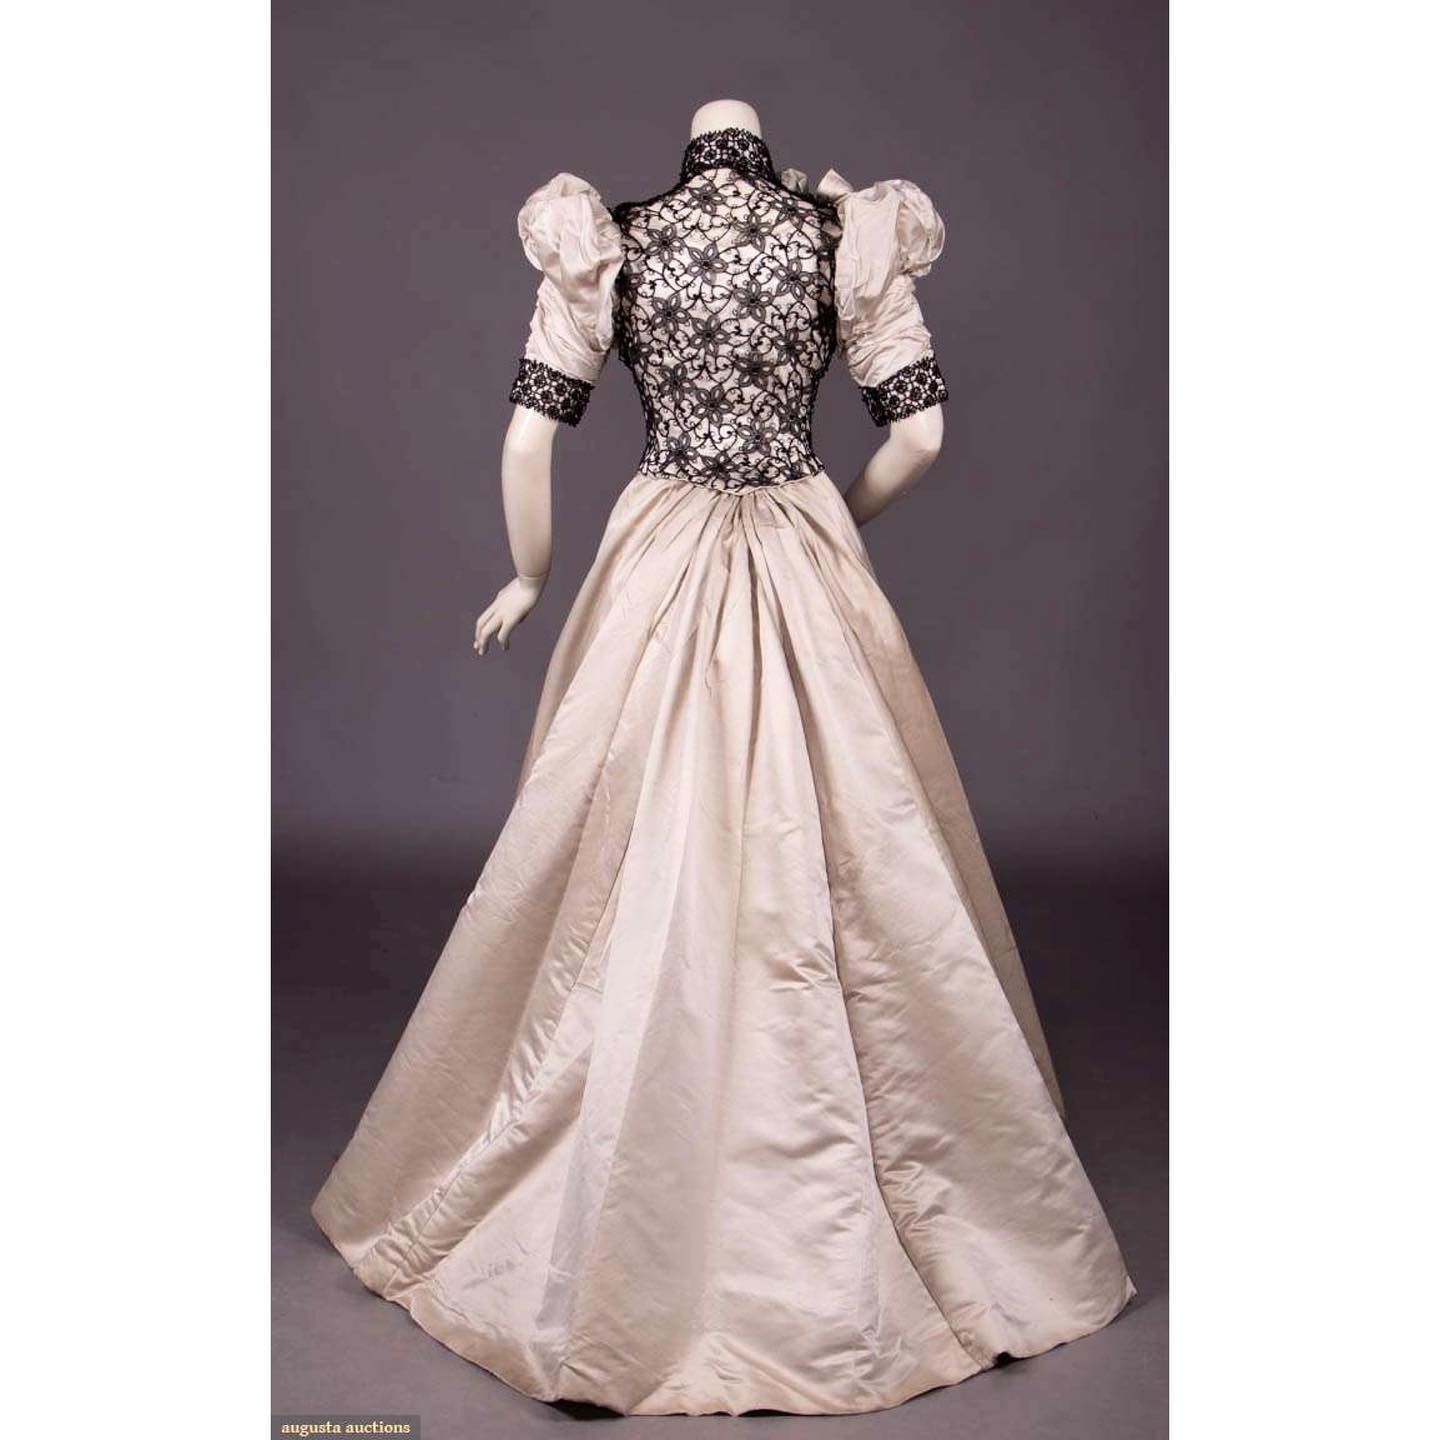 Two-piece twill silk satin gown, silk organza & chemical lace bodice w inserts of French jet beading, ca 1893, sold by Augusta Auctions